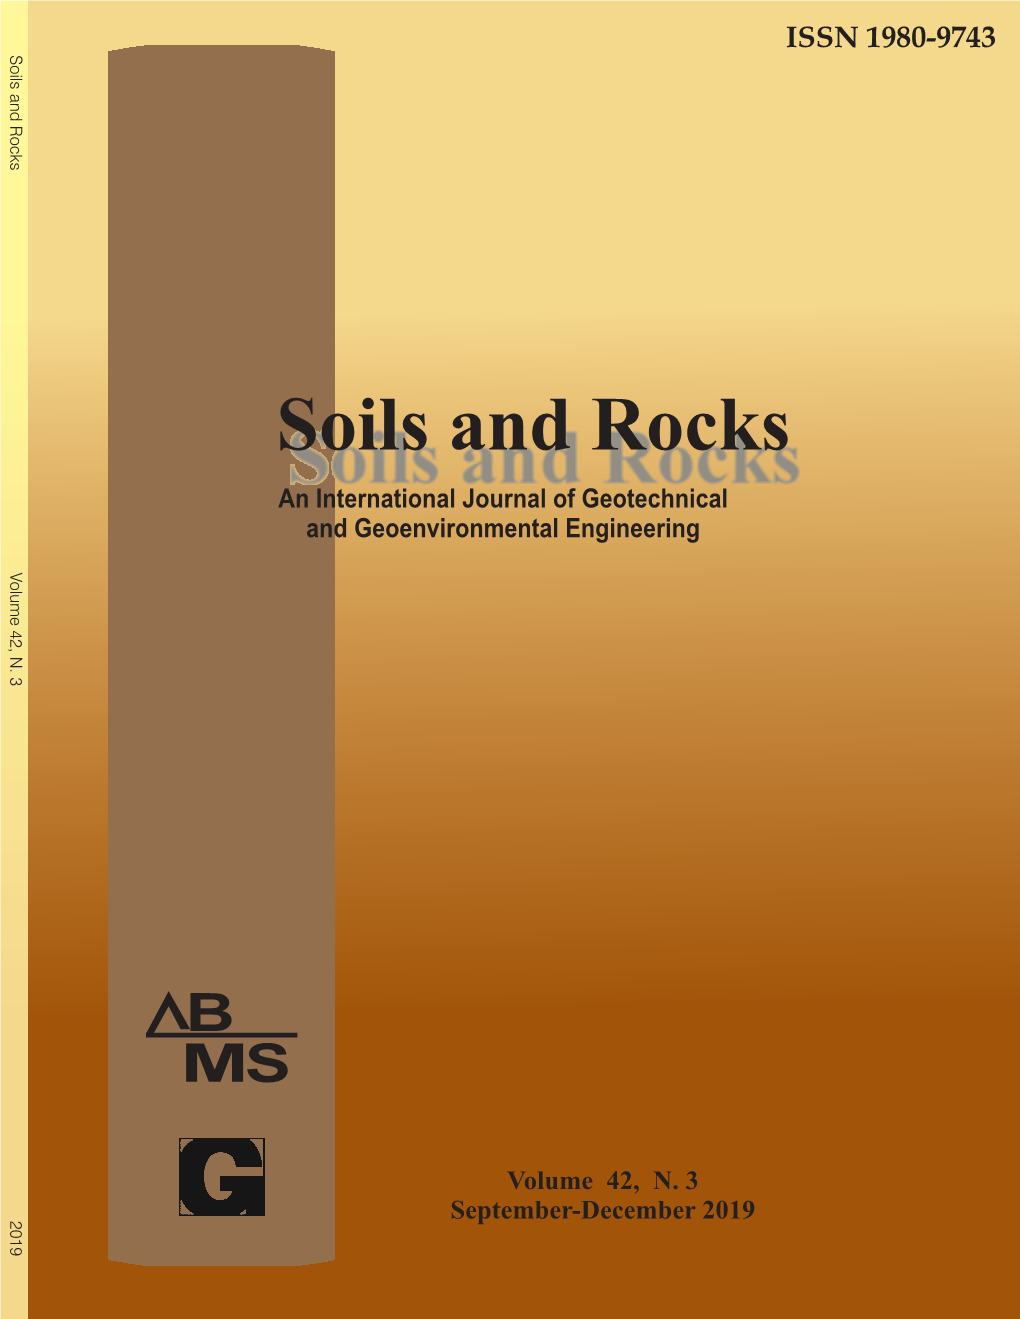 SOILS and ROCKS Ani Nternational Journal of Geotechnical and Geoenvironmental Engineering Soils and Rocks V